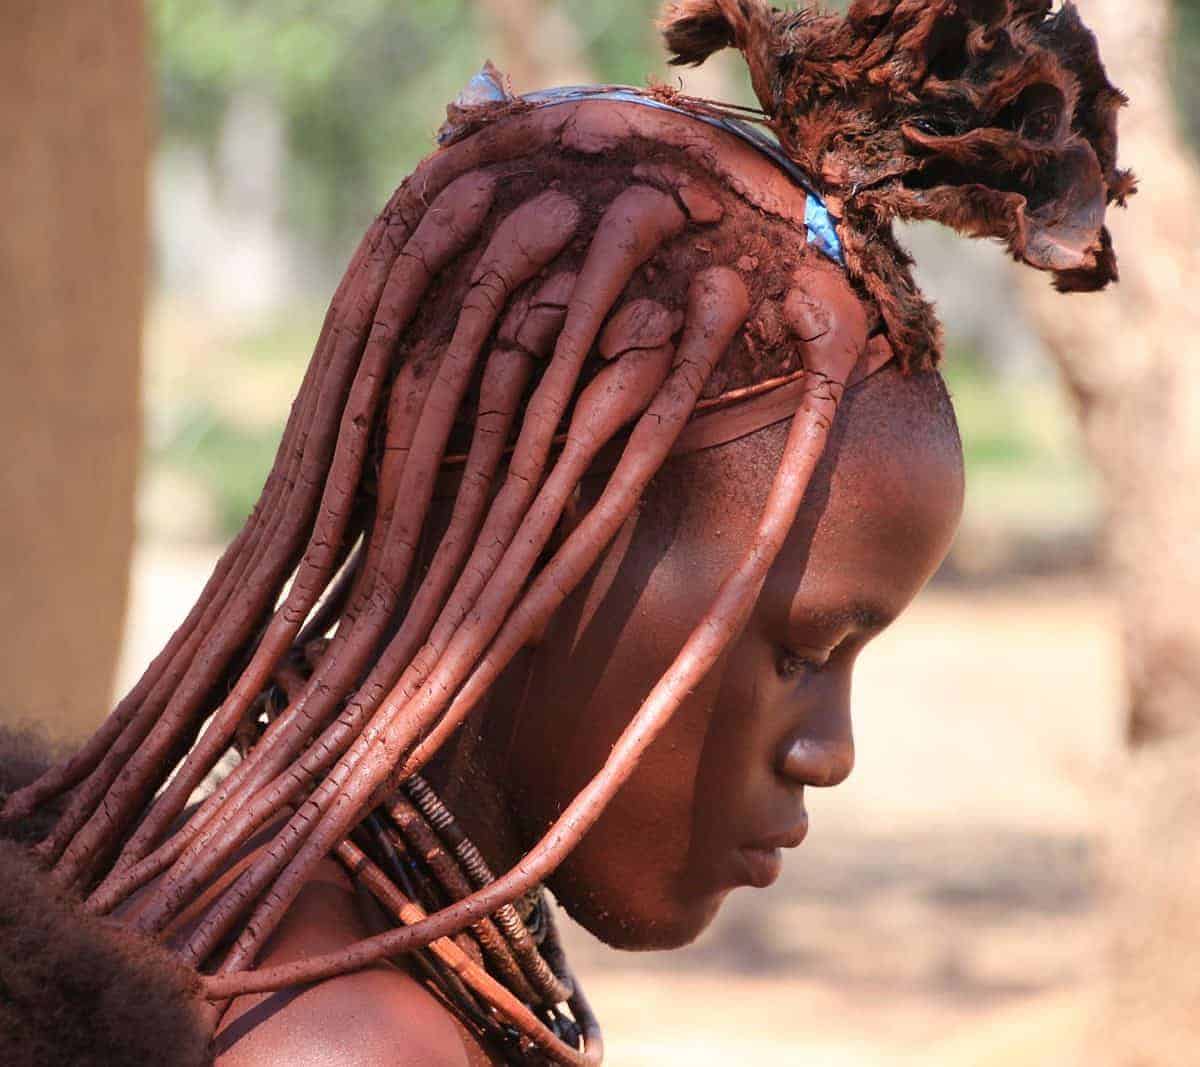 Sharing your wife with visitors is a Himba Tribe tradition photo